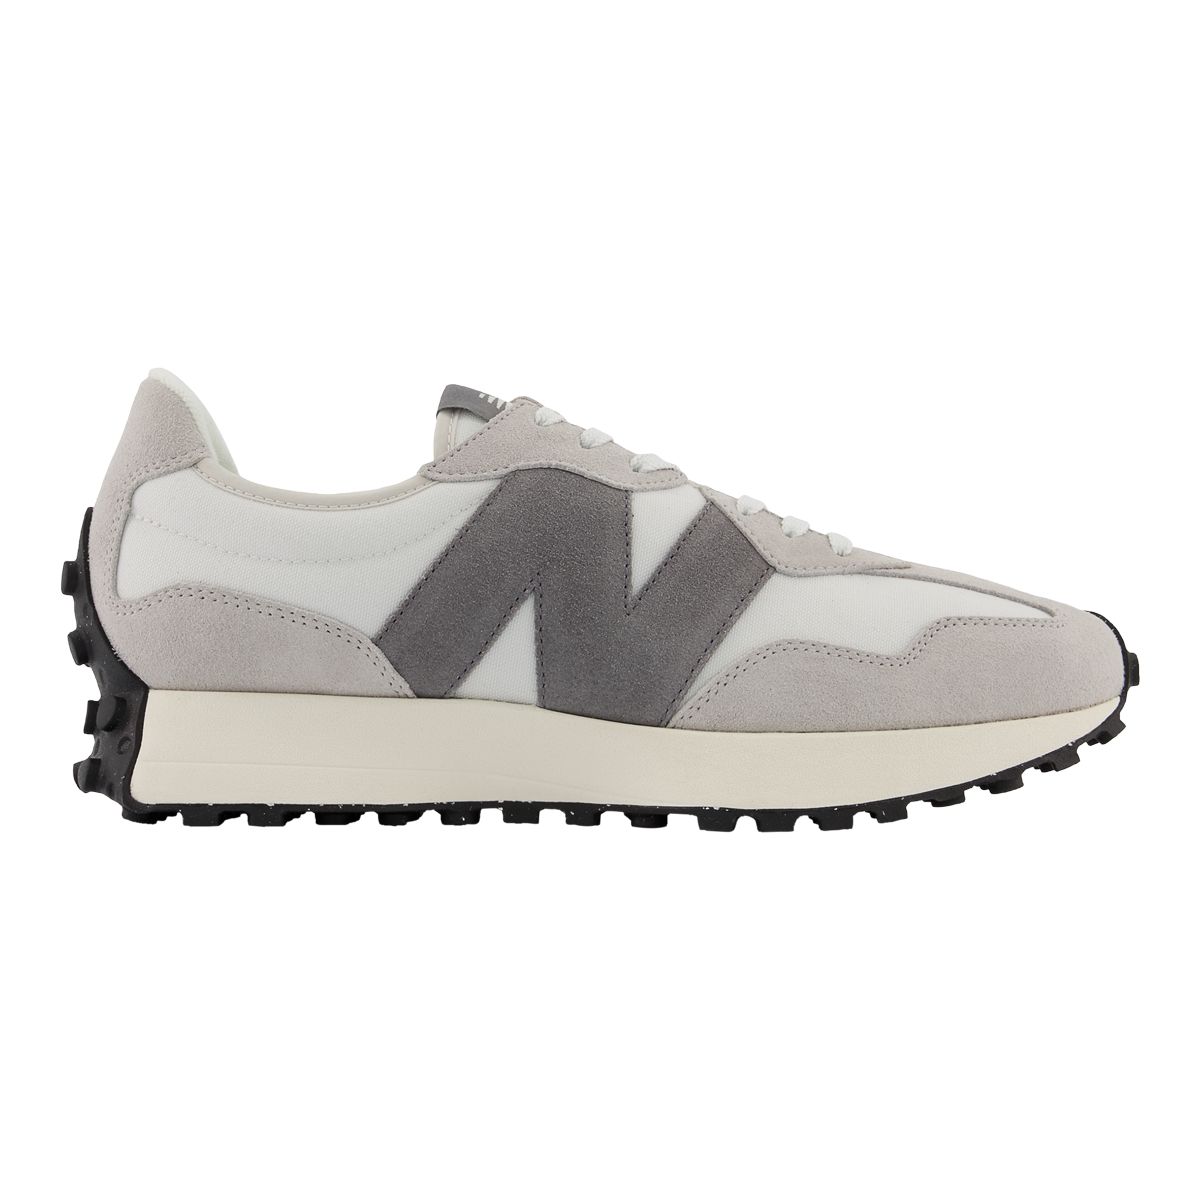 Doordeweekse dagen Syndicaat sextant New Balance Men's 327 Shoes Sneakers Low Top Casual Suede | Southcentre Mall